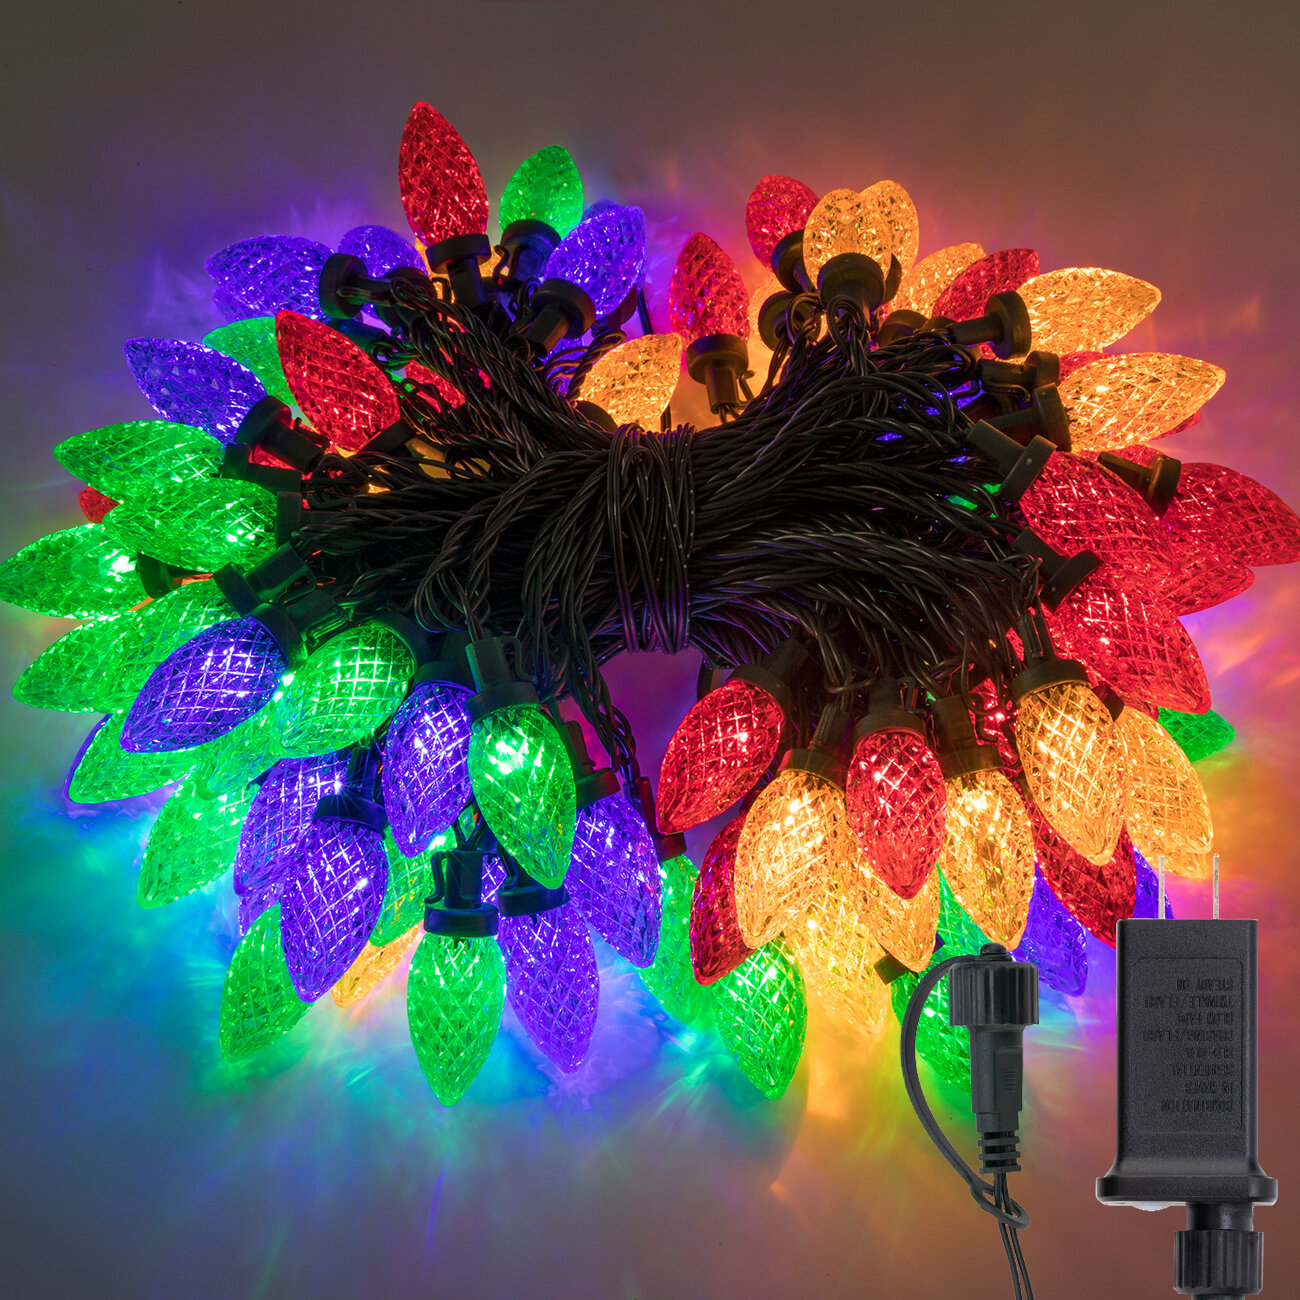  LED Light Keeper - The Complete Tool For Fixing Your LED  Christmas Lights : Home & Kitchen